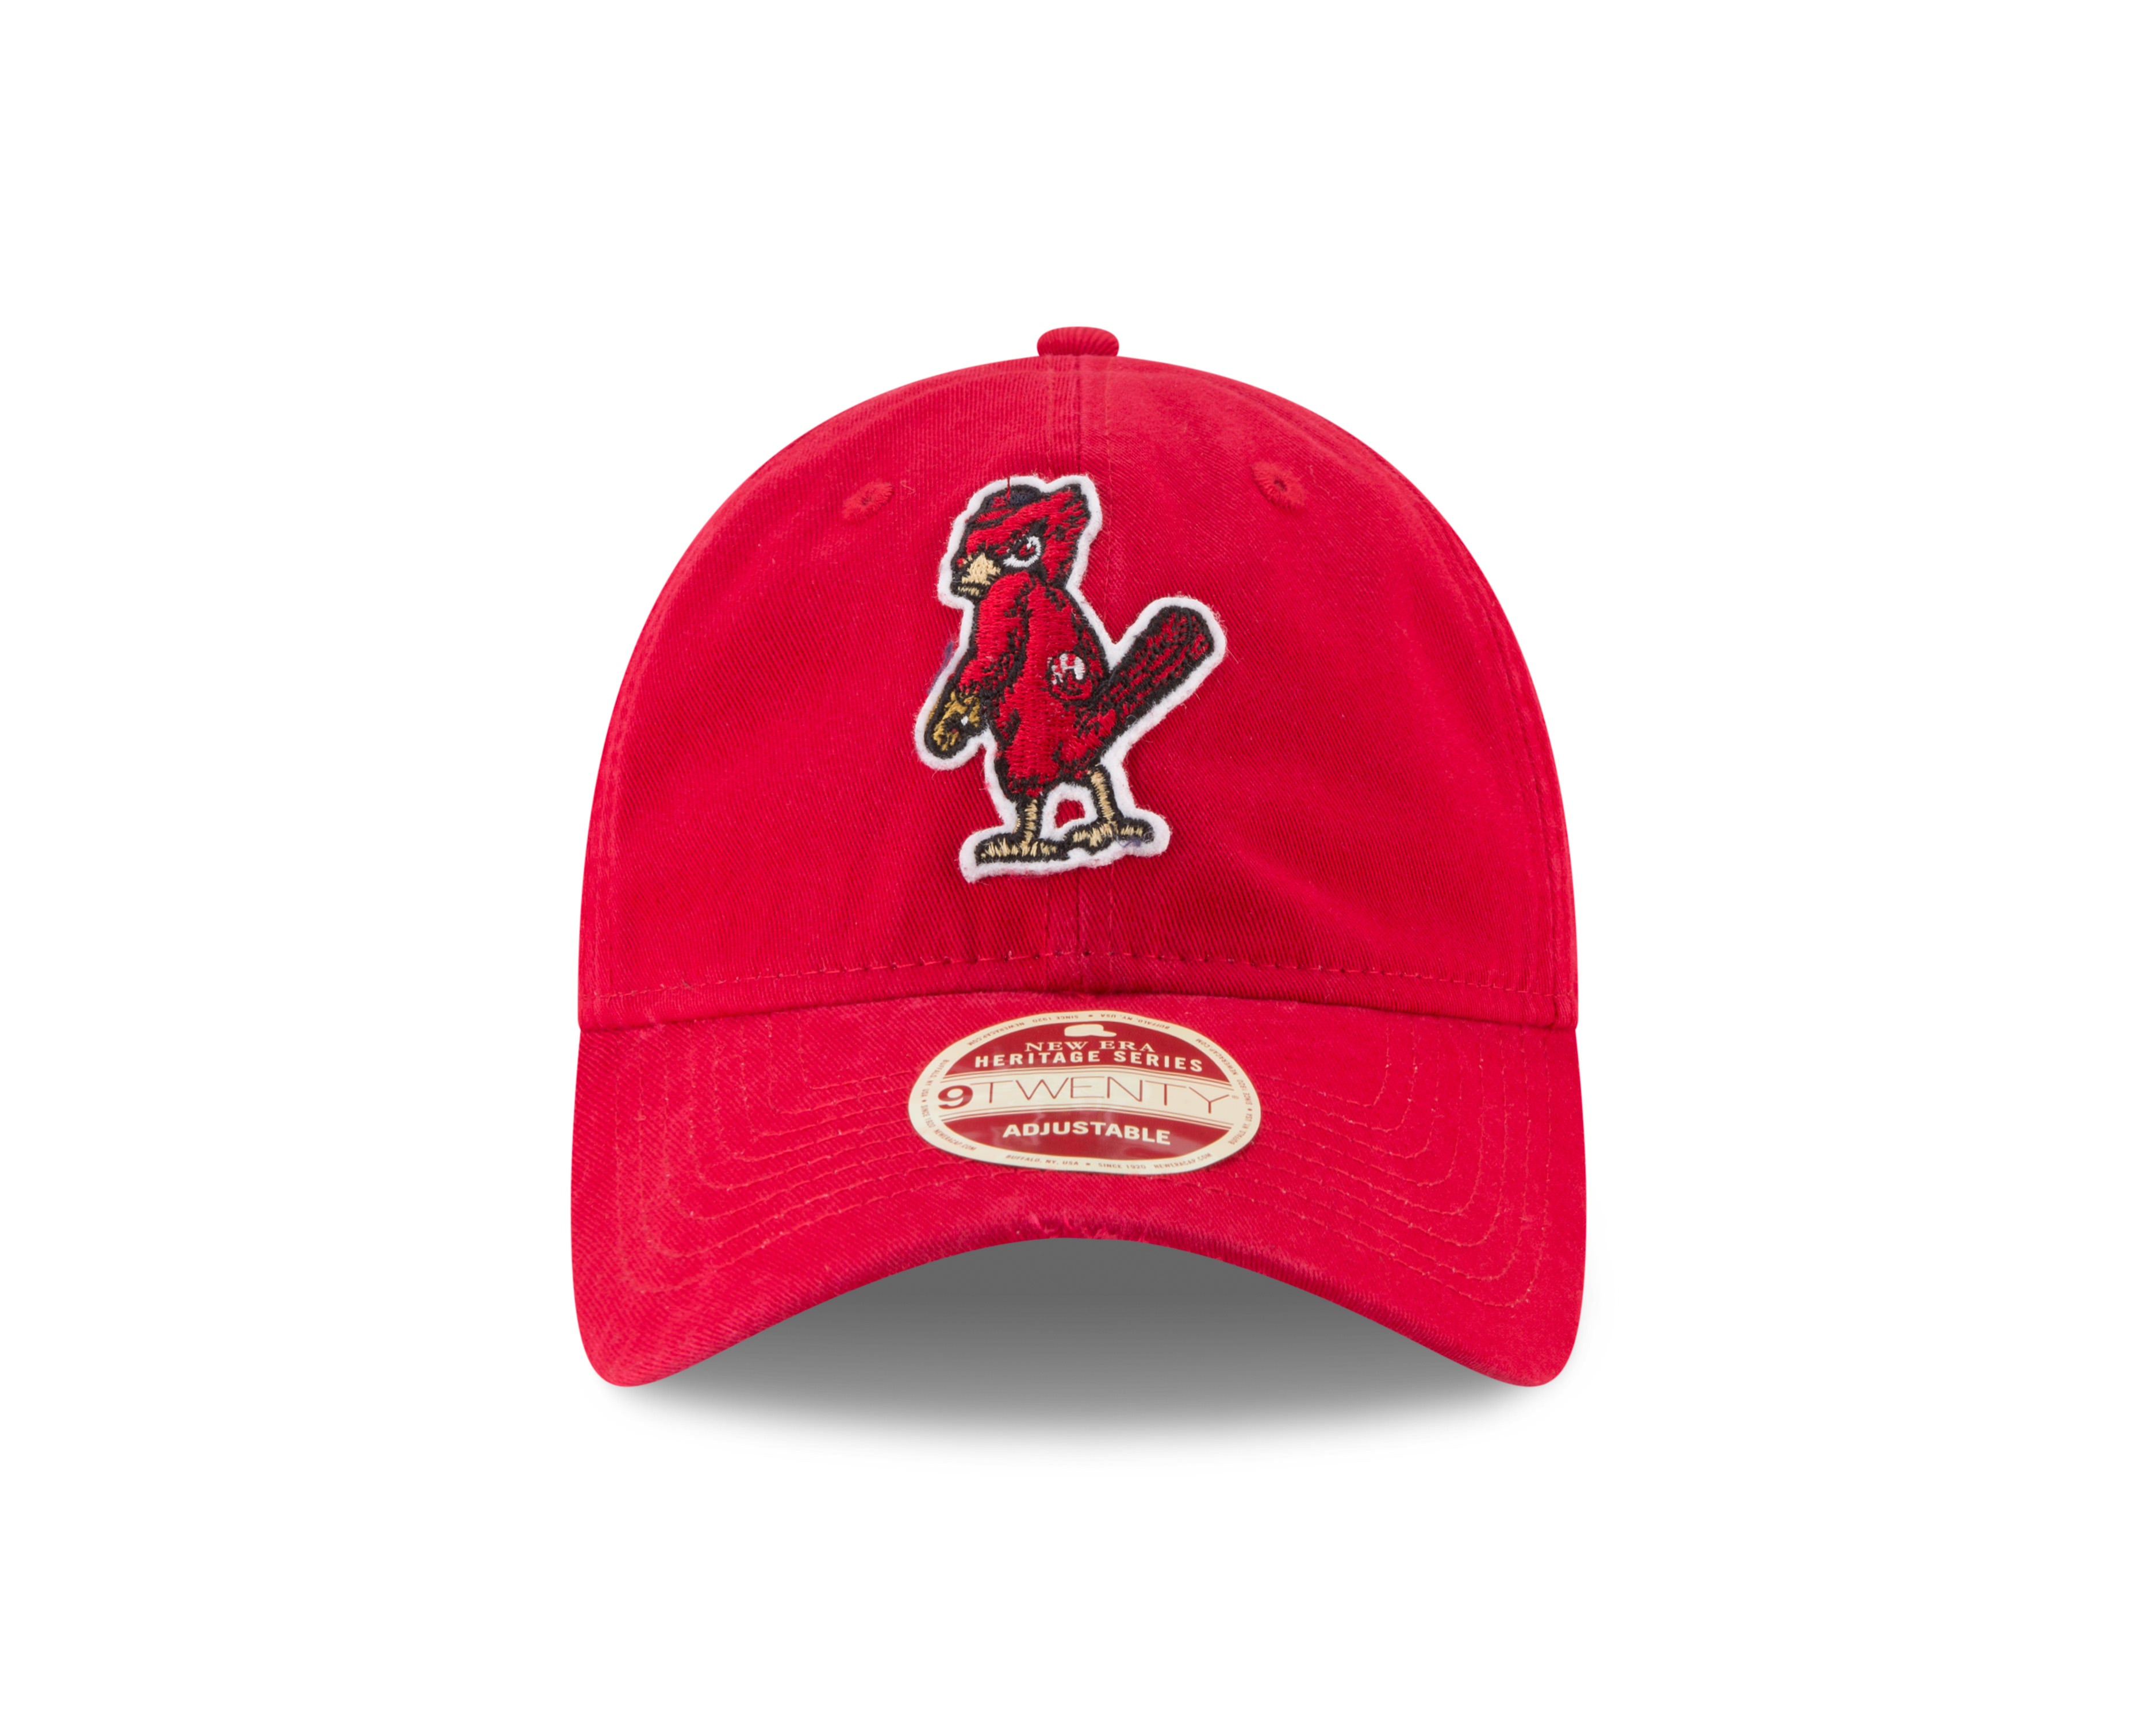 St. Louis Cardinals New Era MLB Cooperstown Washed Trucker 9FORTY Hat -  1950